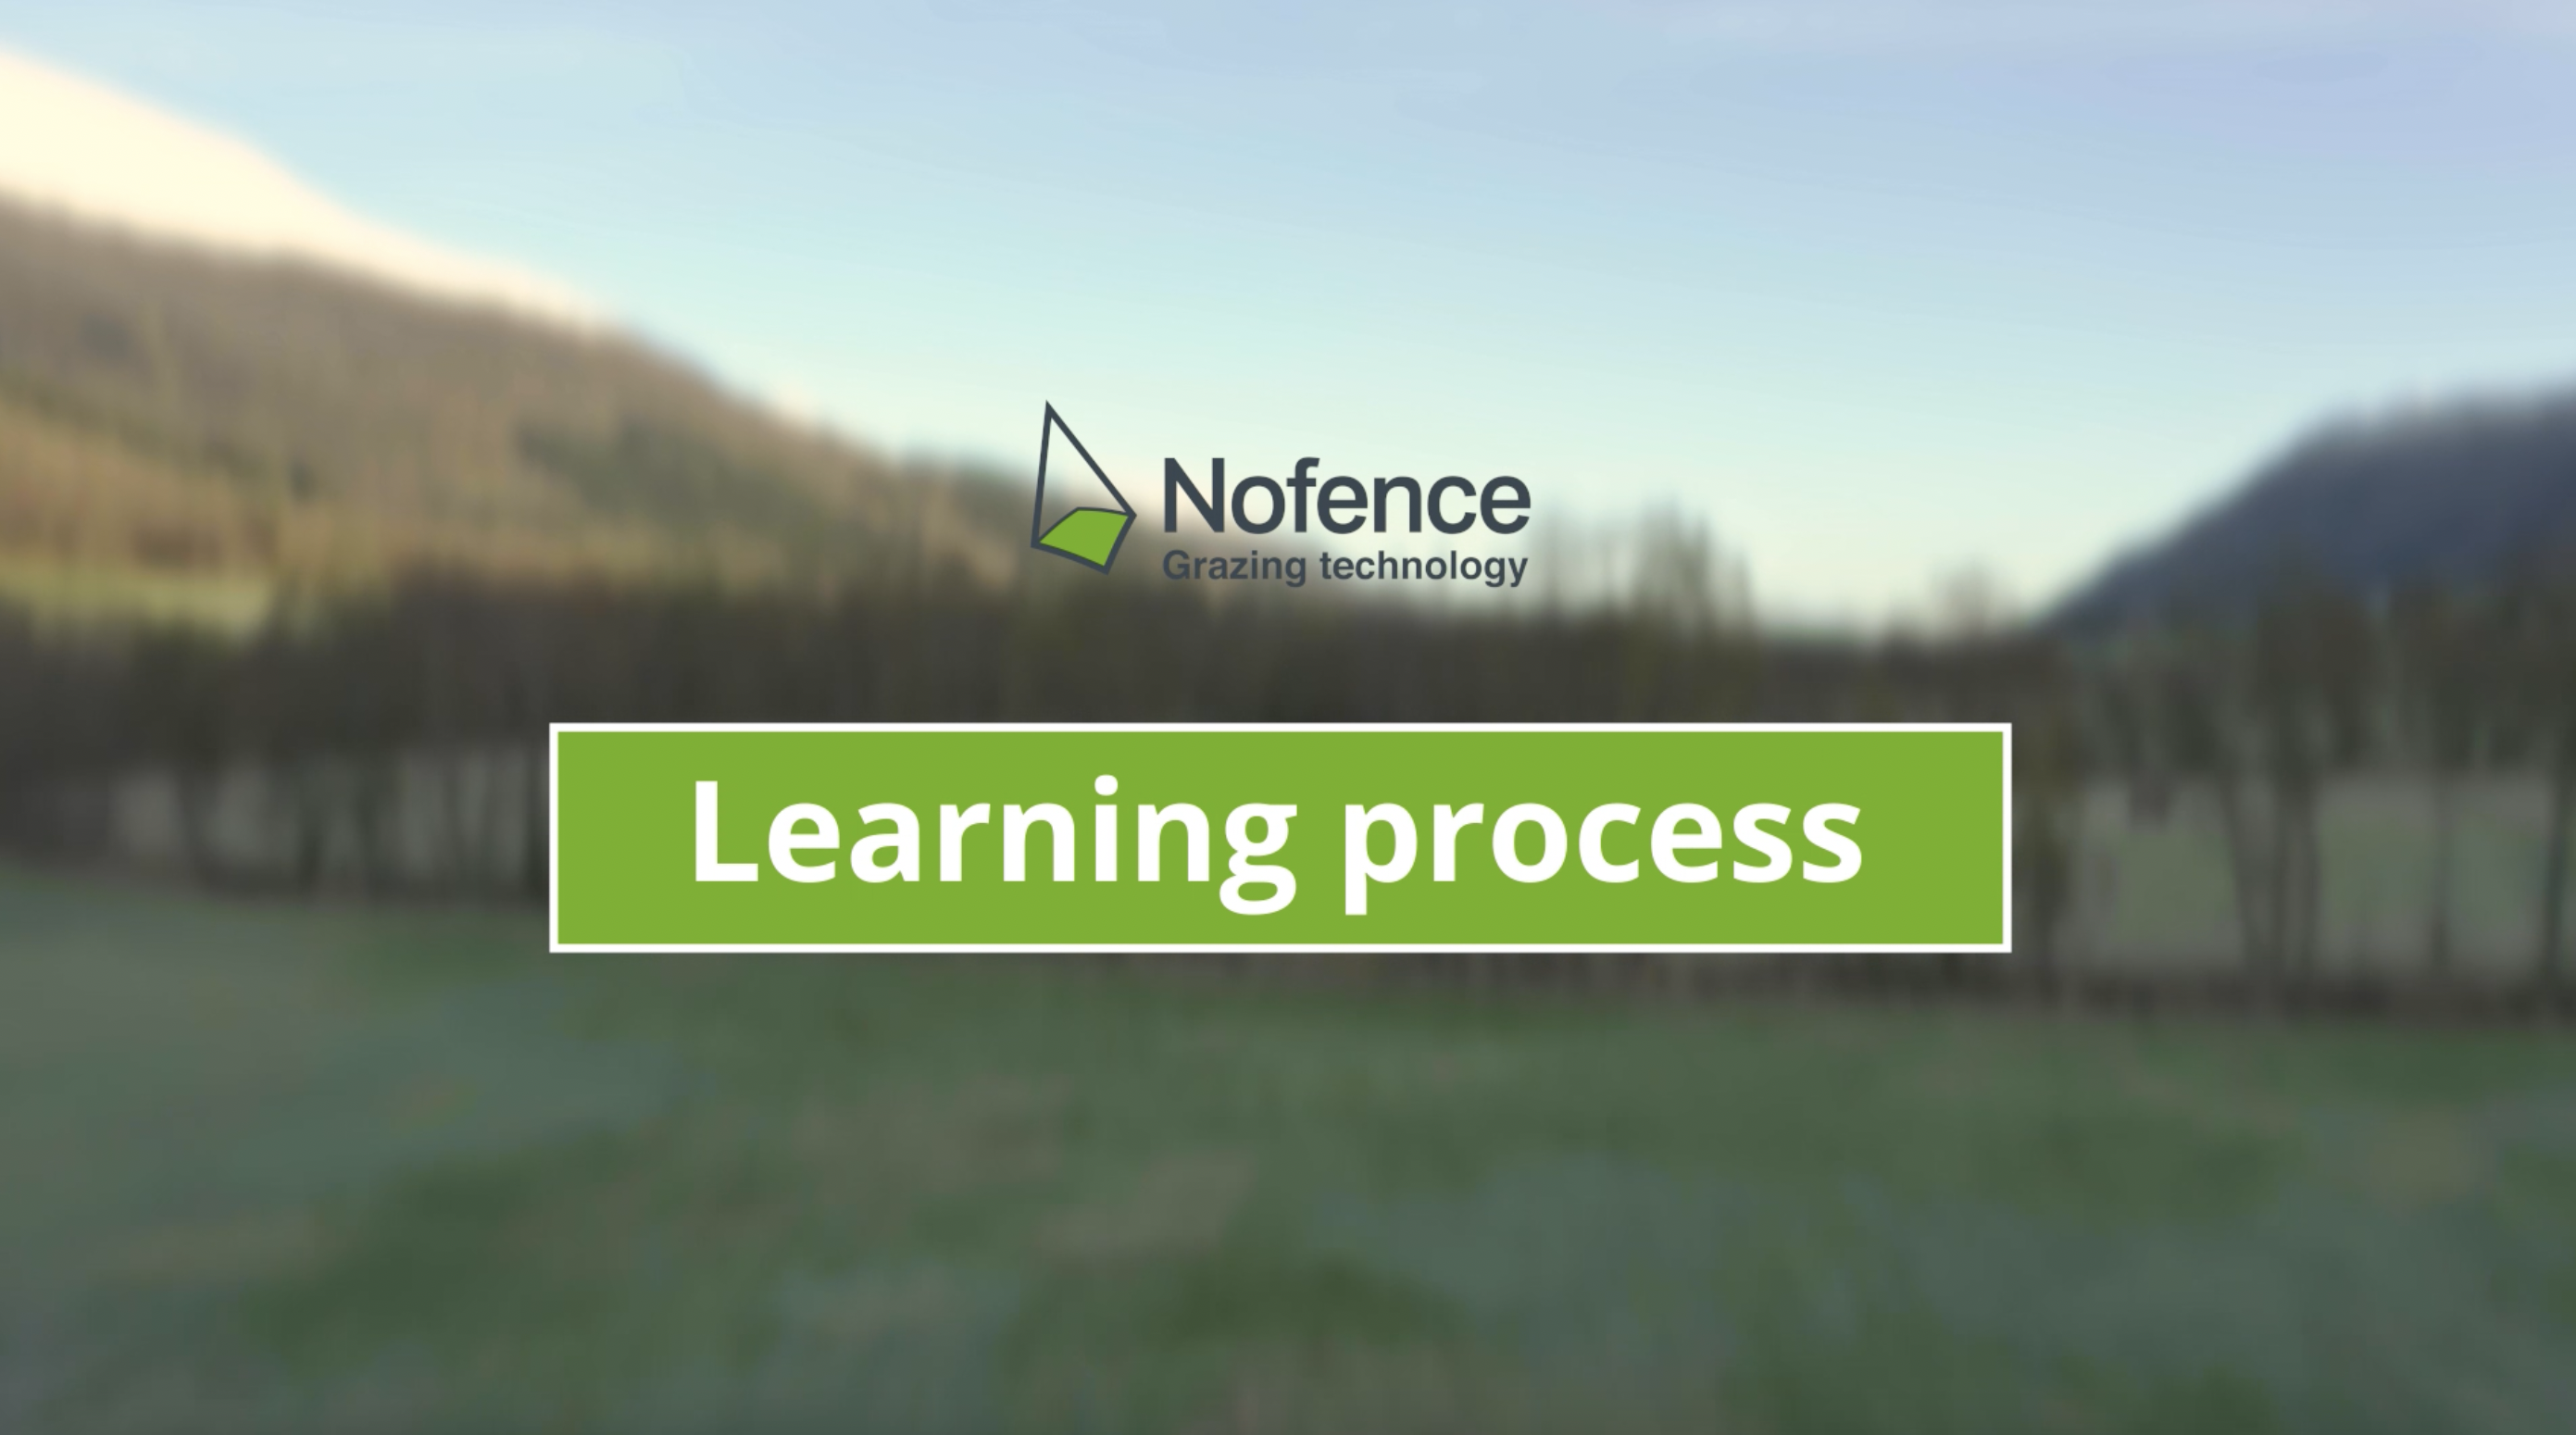 Nofence learning process